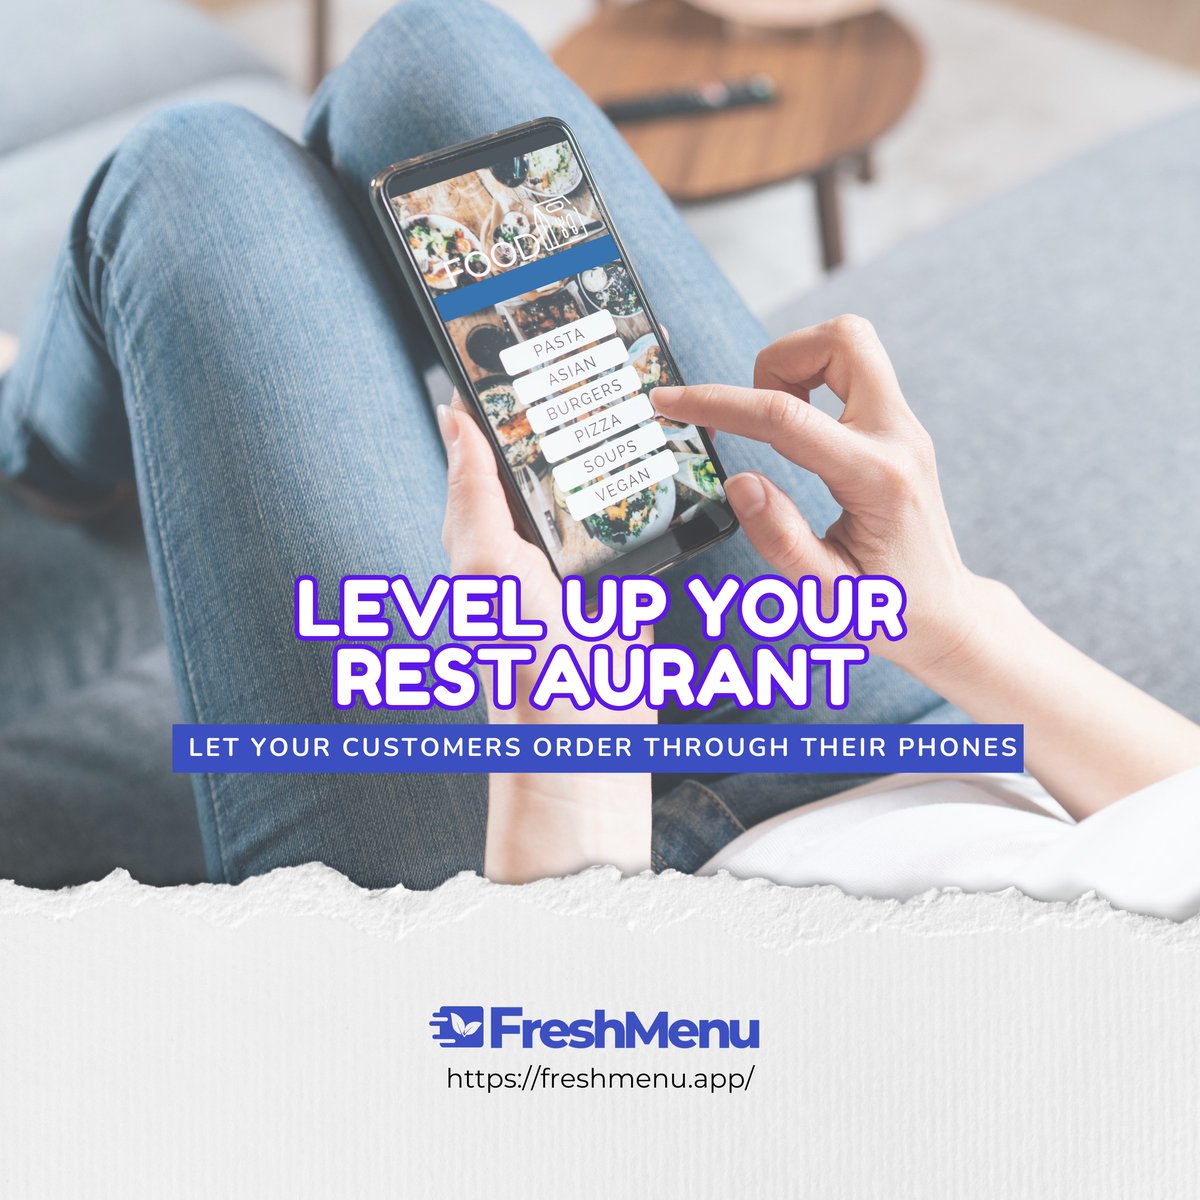 Give customers the option to order meals as soon as they sit down in your restaurant - with their phones, a simple scan of a QR code on the table and after selection of dishes the order goes immediately to the staff and kitchen. #foodieph #manila #restaurantph #cebu #bacolod